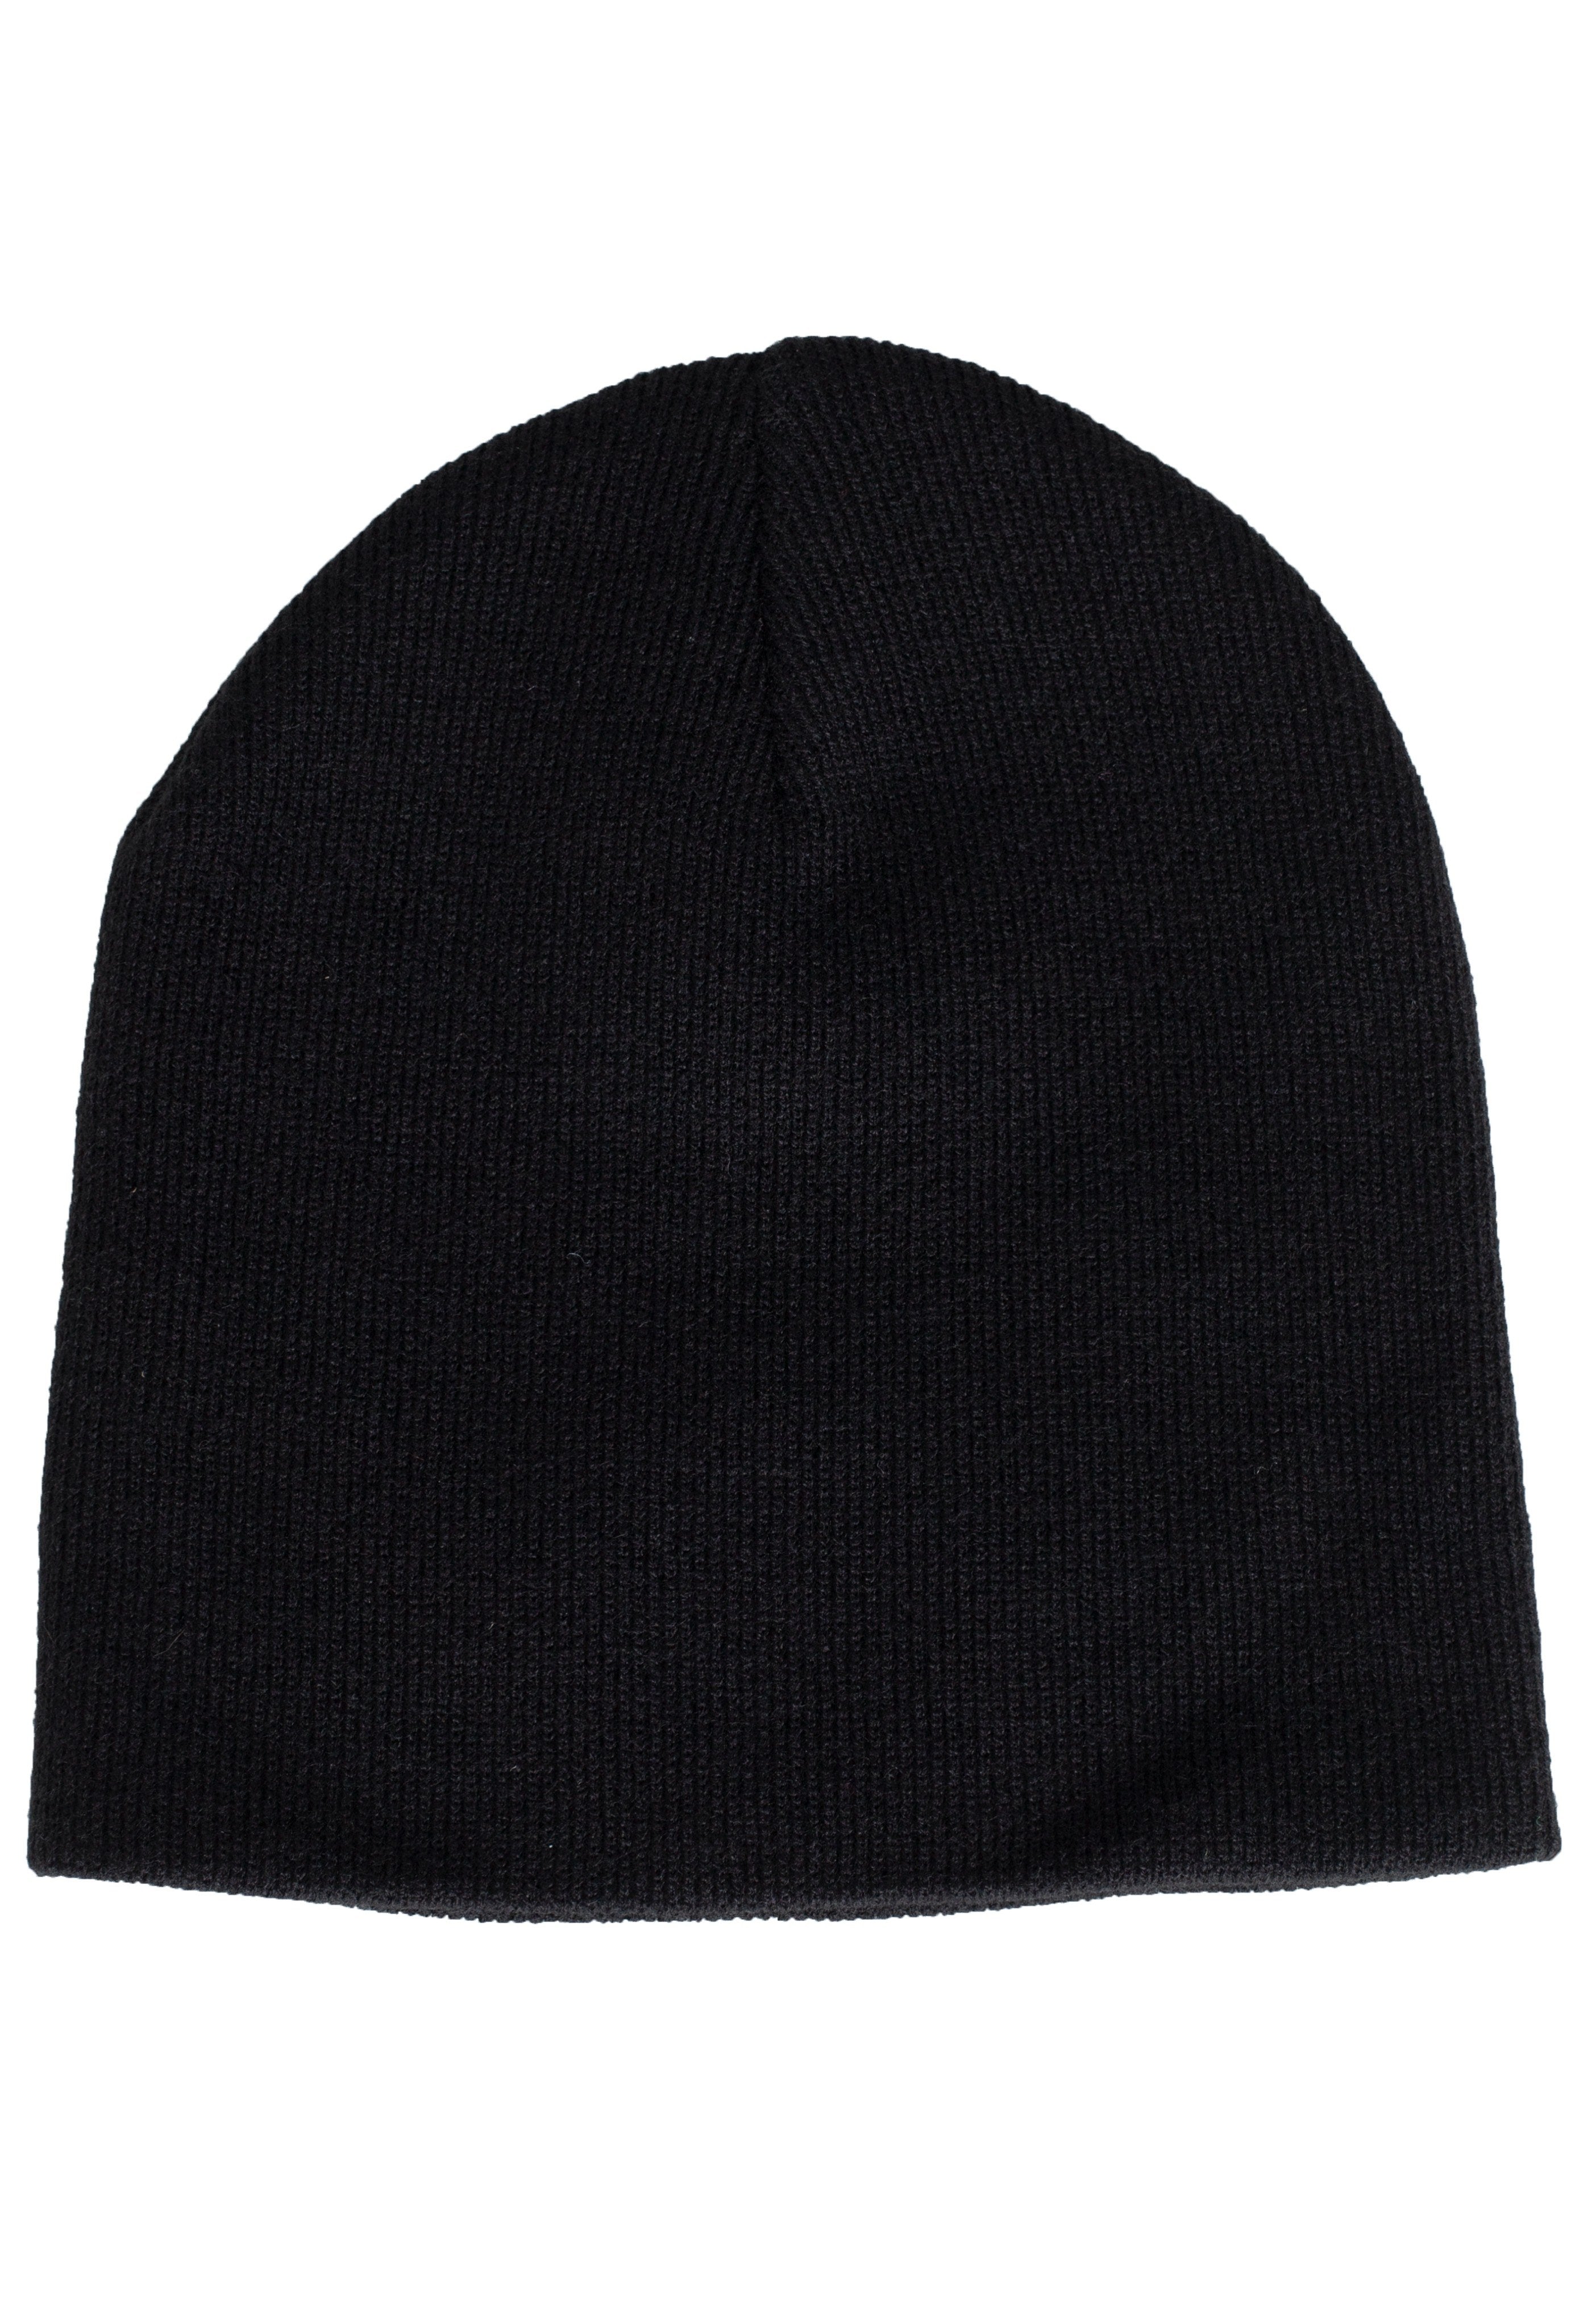 Suffocation - Pull On Logo - Beanie